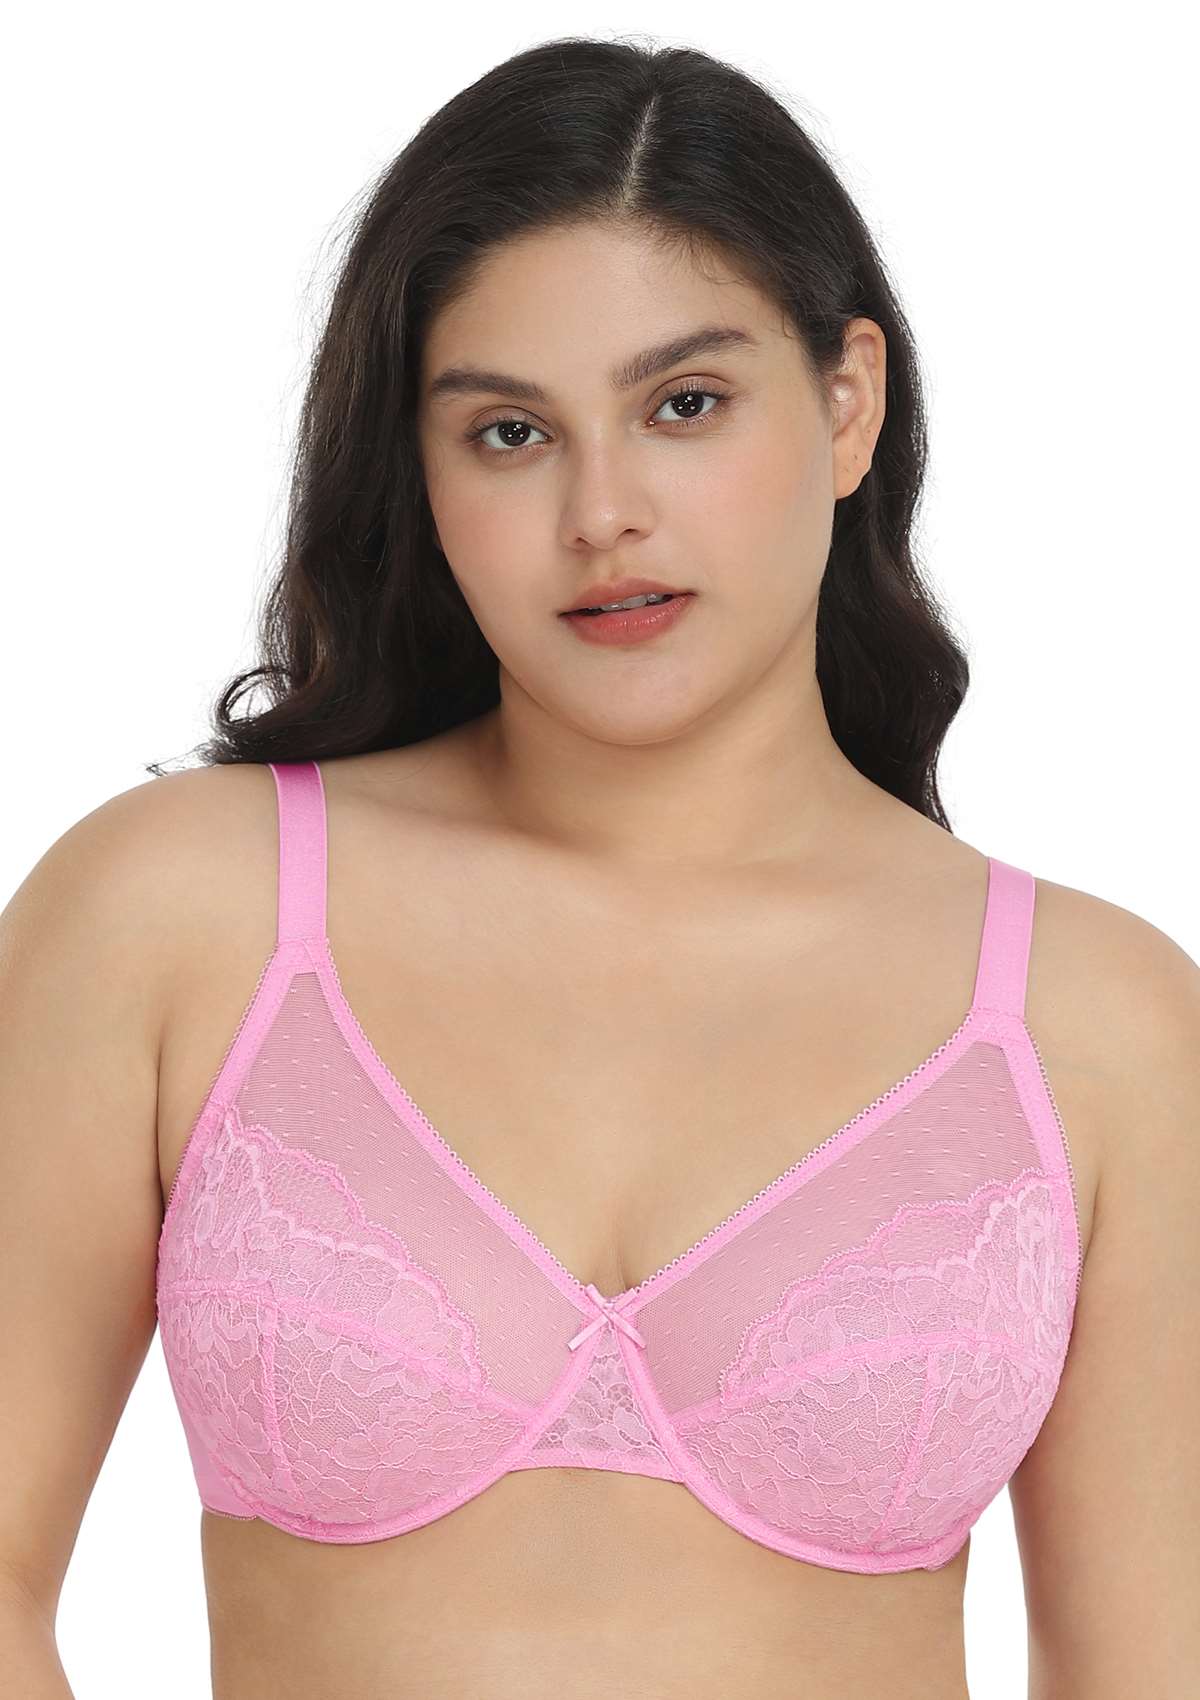 HSIA Enchante Lacy Bra: Comfy Sheer Lace Bra With Lift - Pink / 44 / C